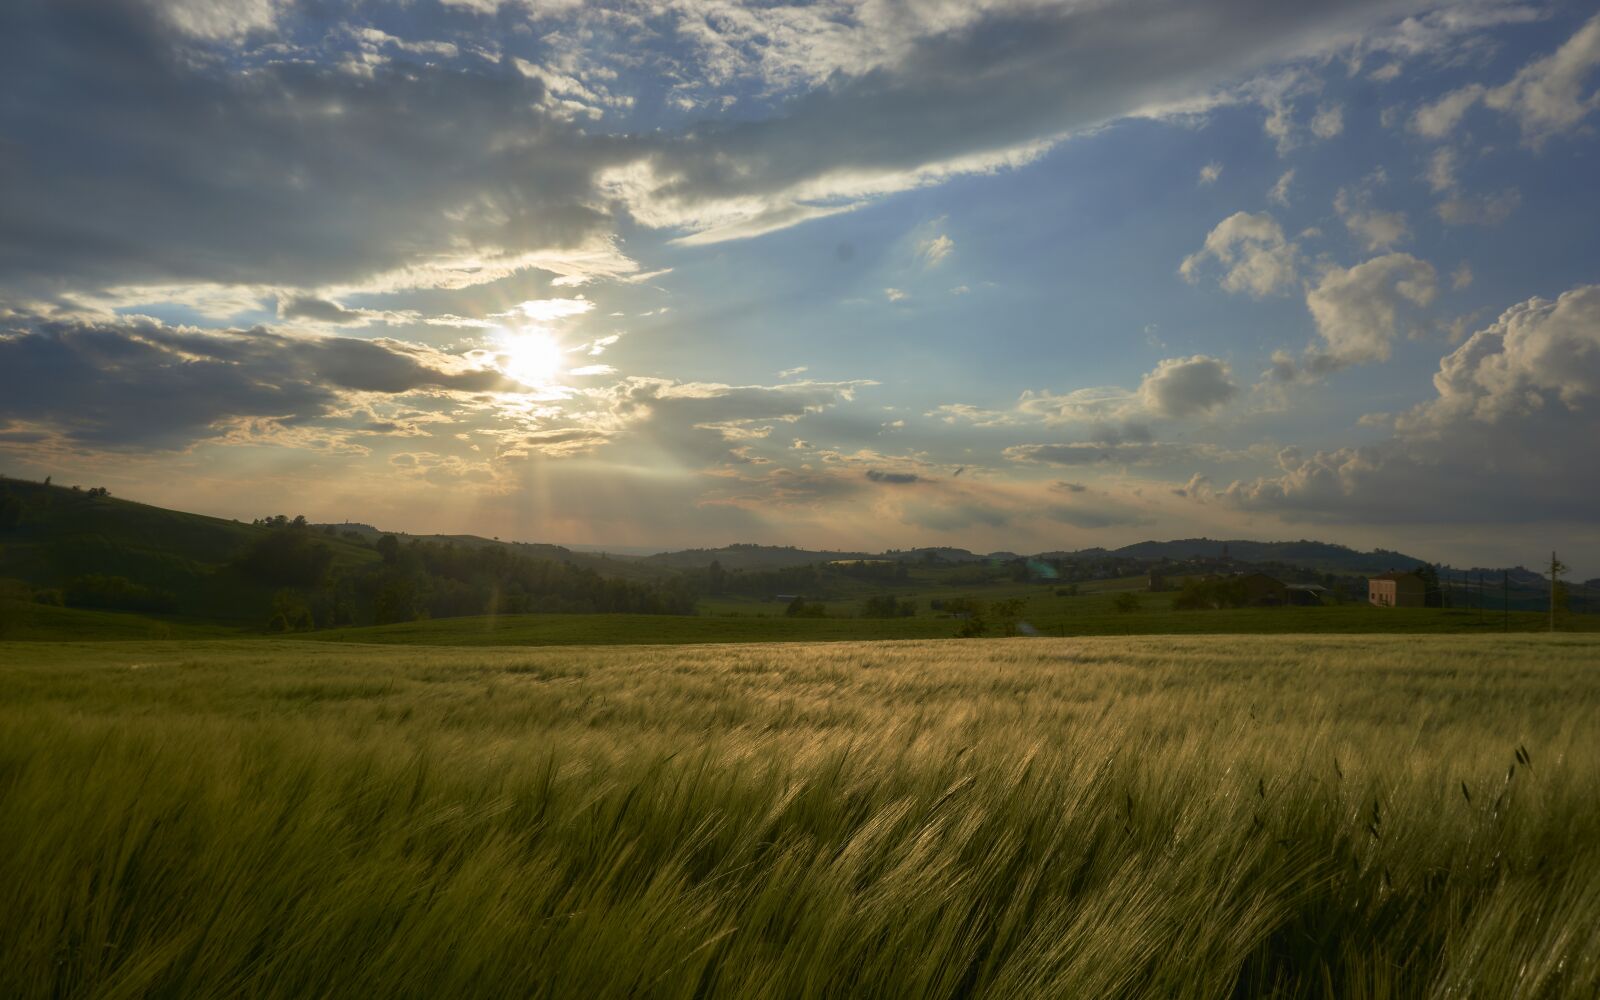 Sony a6000 + Sony E PZ 16-50 mm F3.5-5.6 OSS (SELP1650) sample photo. Sunset, nature, wheat photography